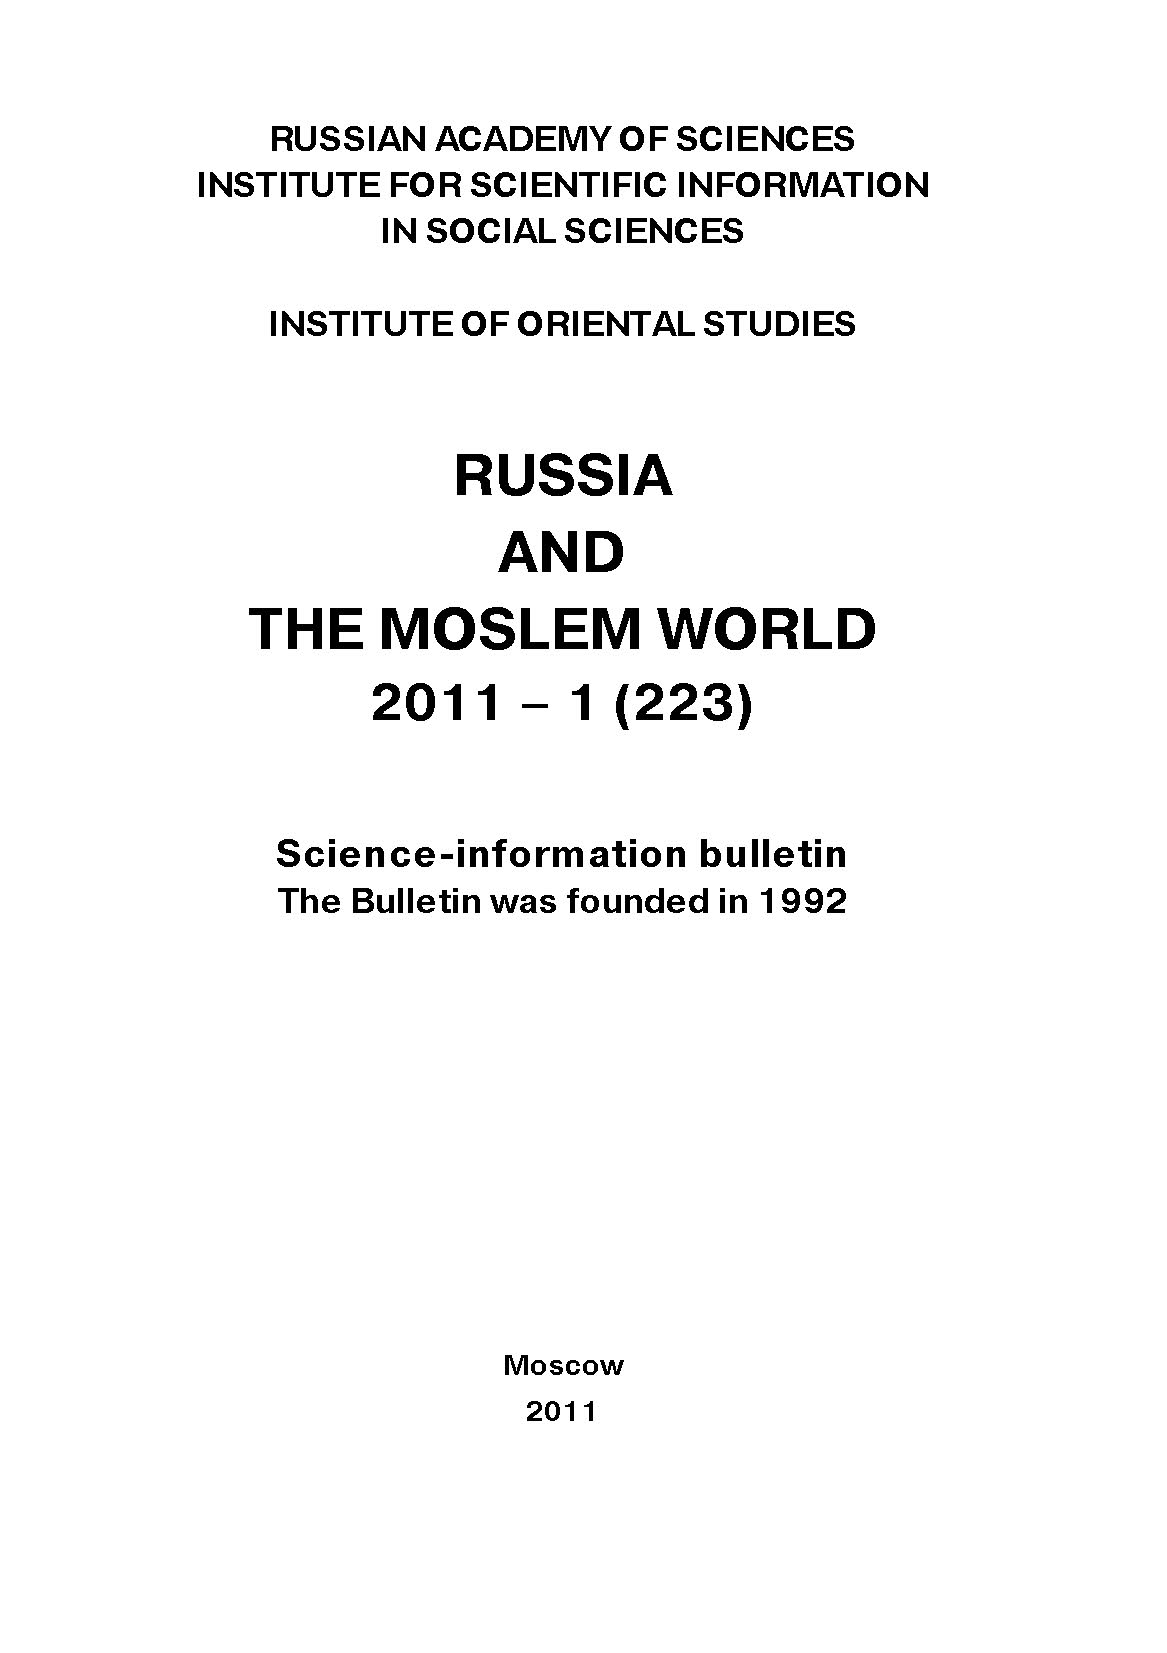 Russia and the Moslem World№ 01 / 2011